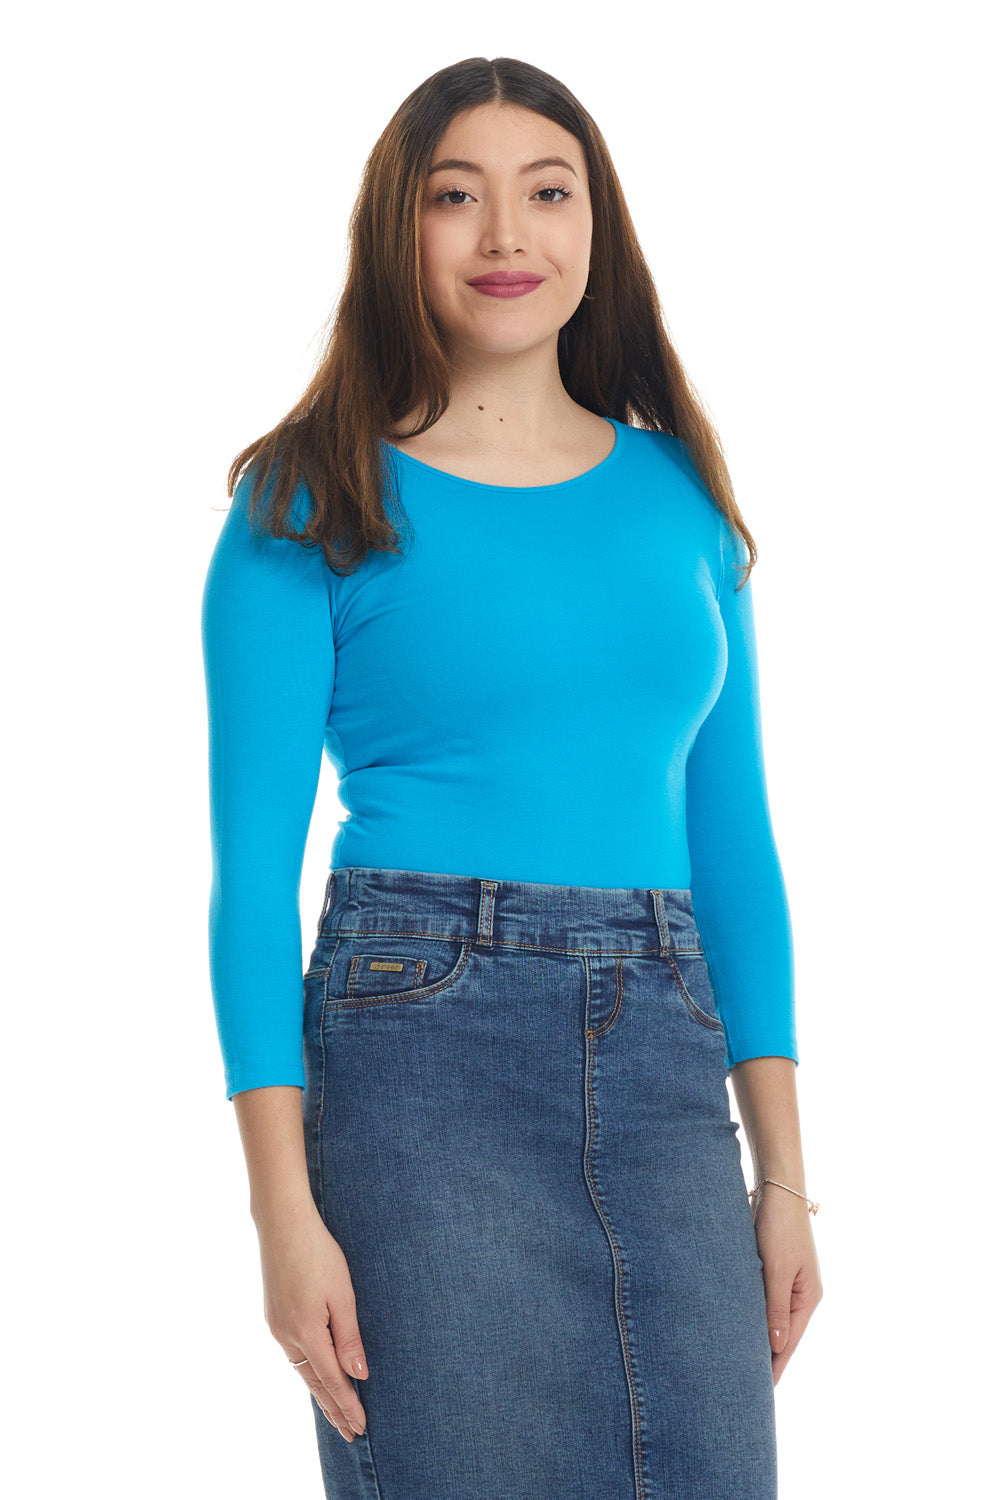 Blue 3/4 Sleeve Snug Fit Cotton Boat Neck Layering Shirt for Women